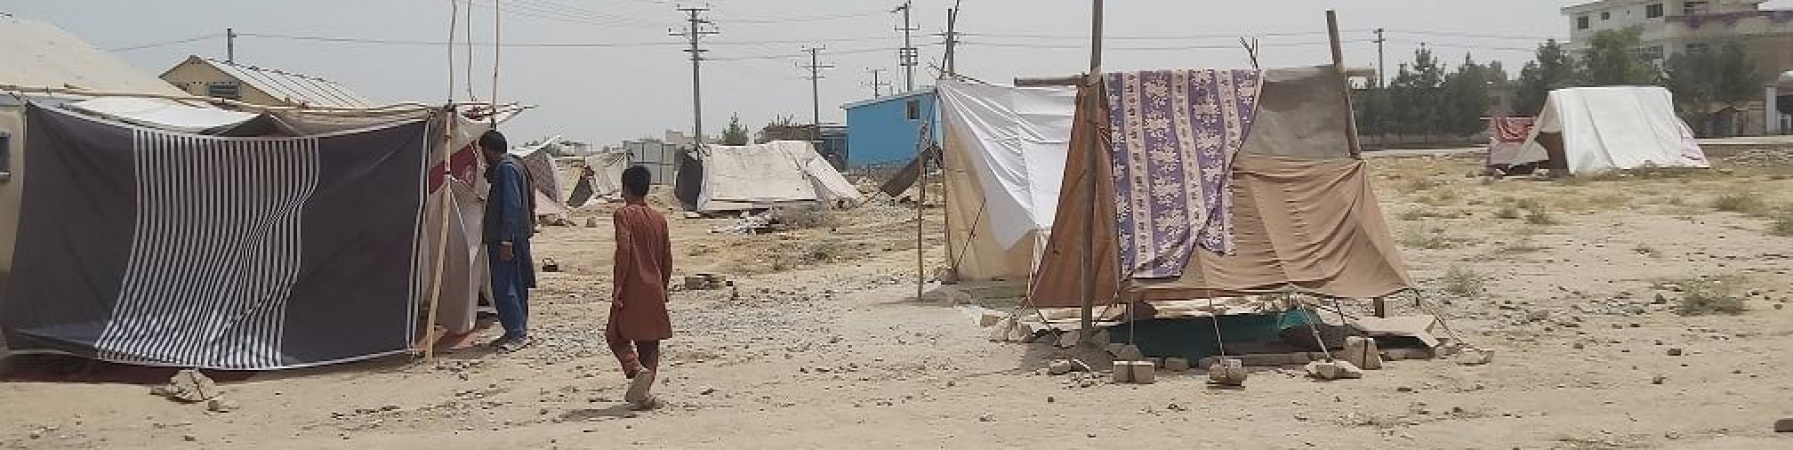 accampamento temporaneo in Afghanistan